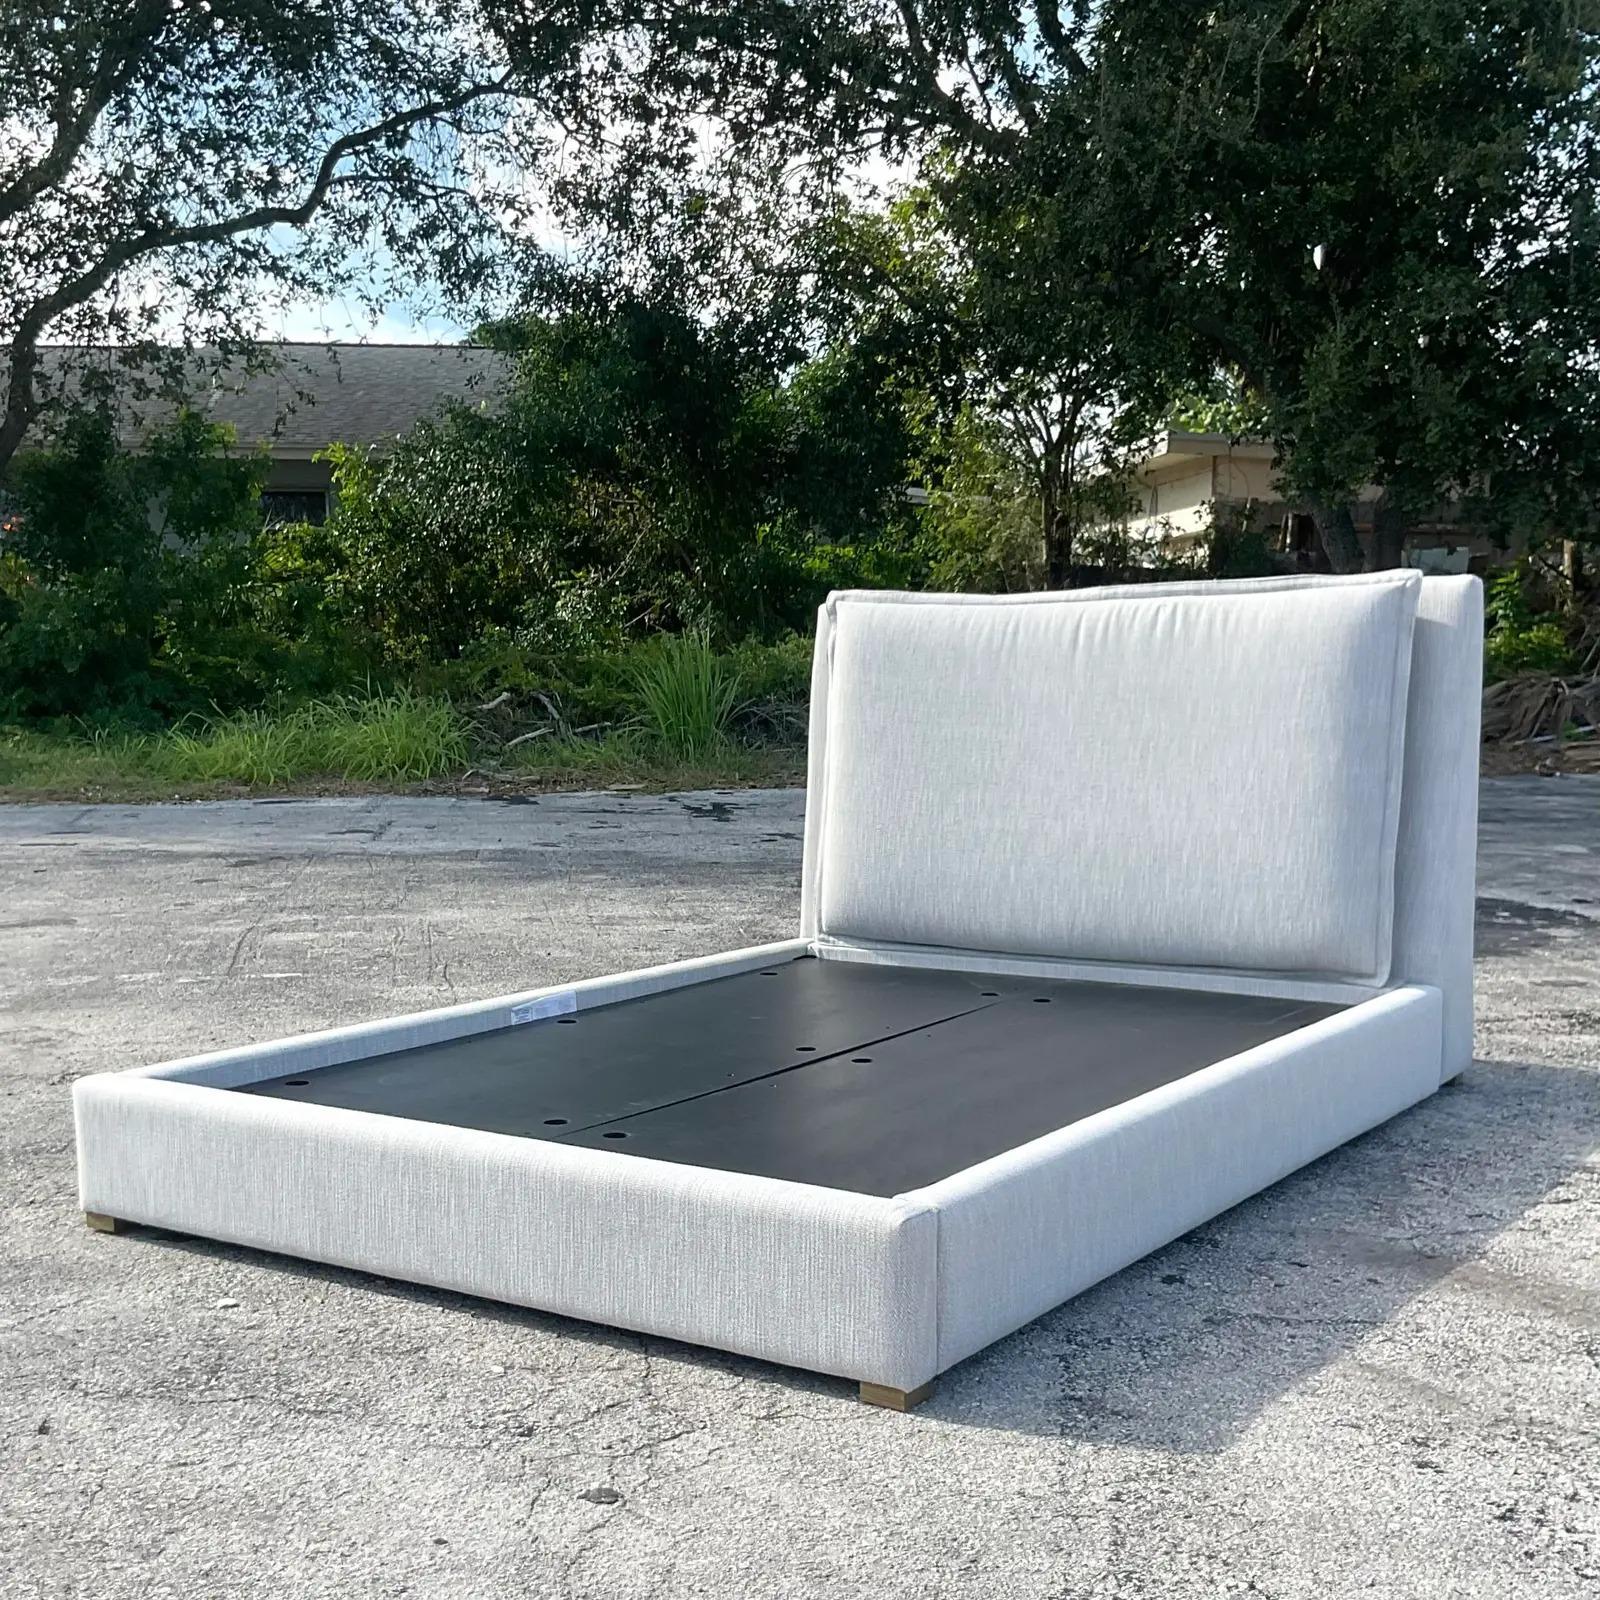 Vintage Contemporary Upholstered Queen Platform Bed. Made by the iconic Restoration Hardware. Thr chic Slone design. Acquired from a Palm Beach estate.